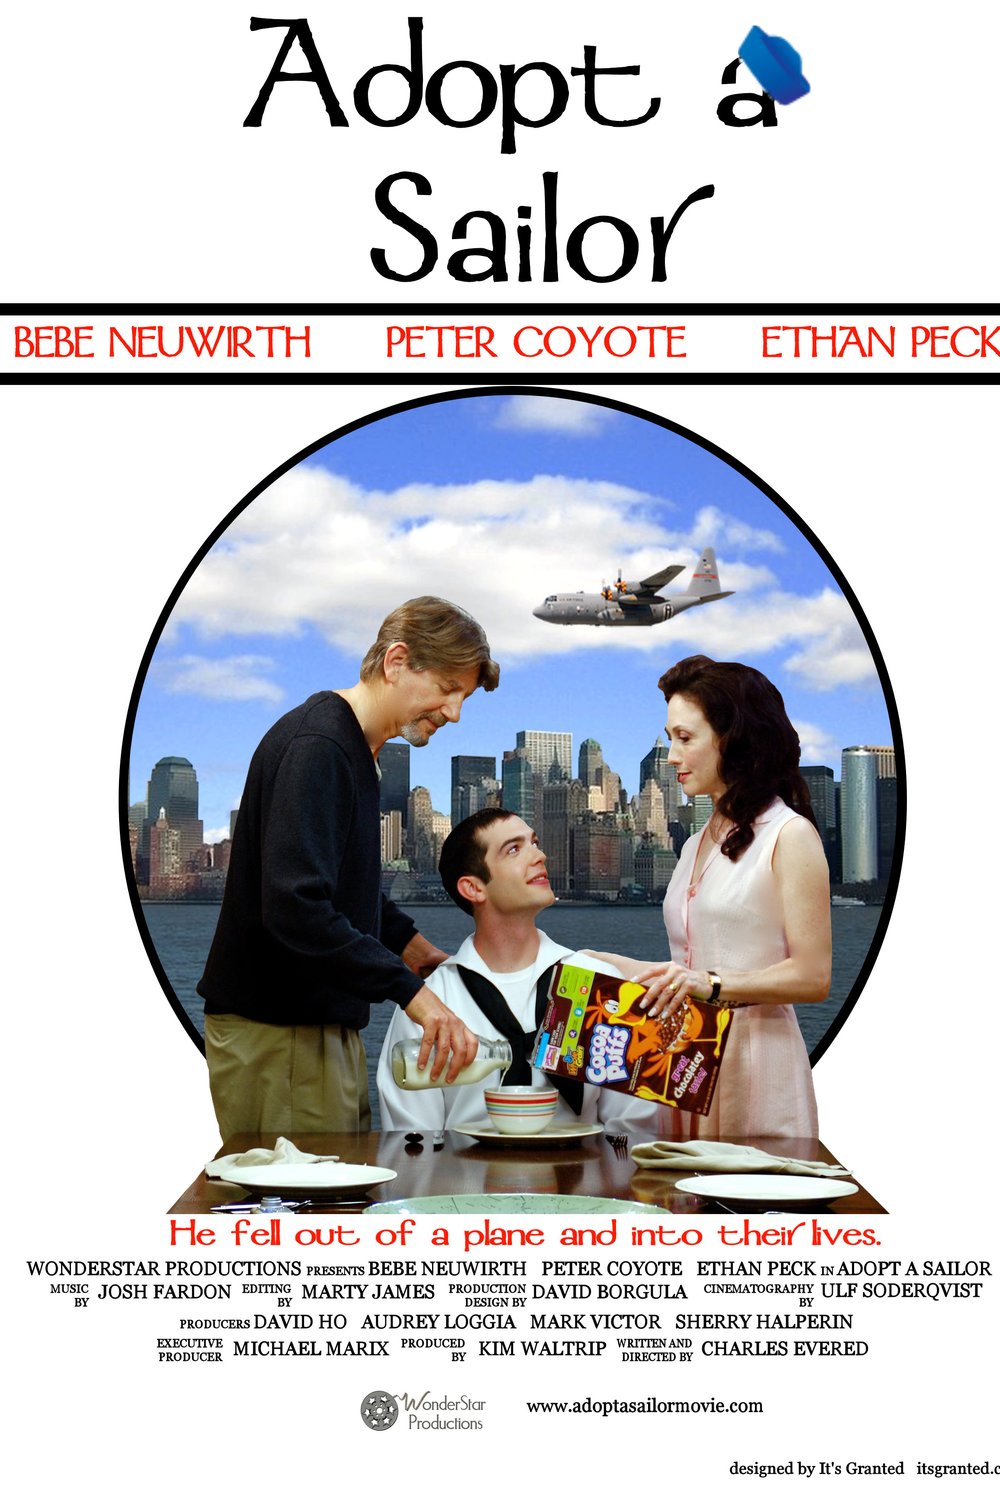 Poster of the movie Adopt a Sailor